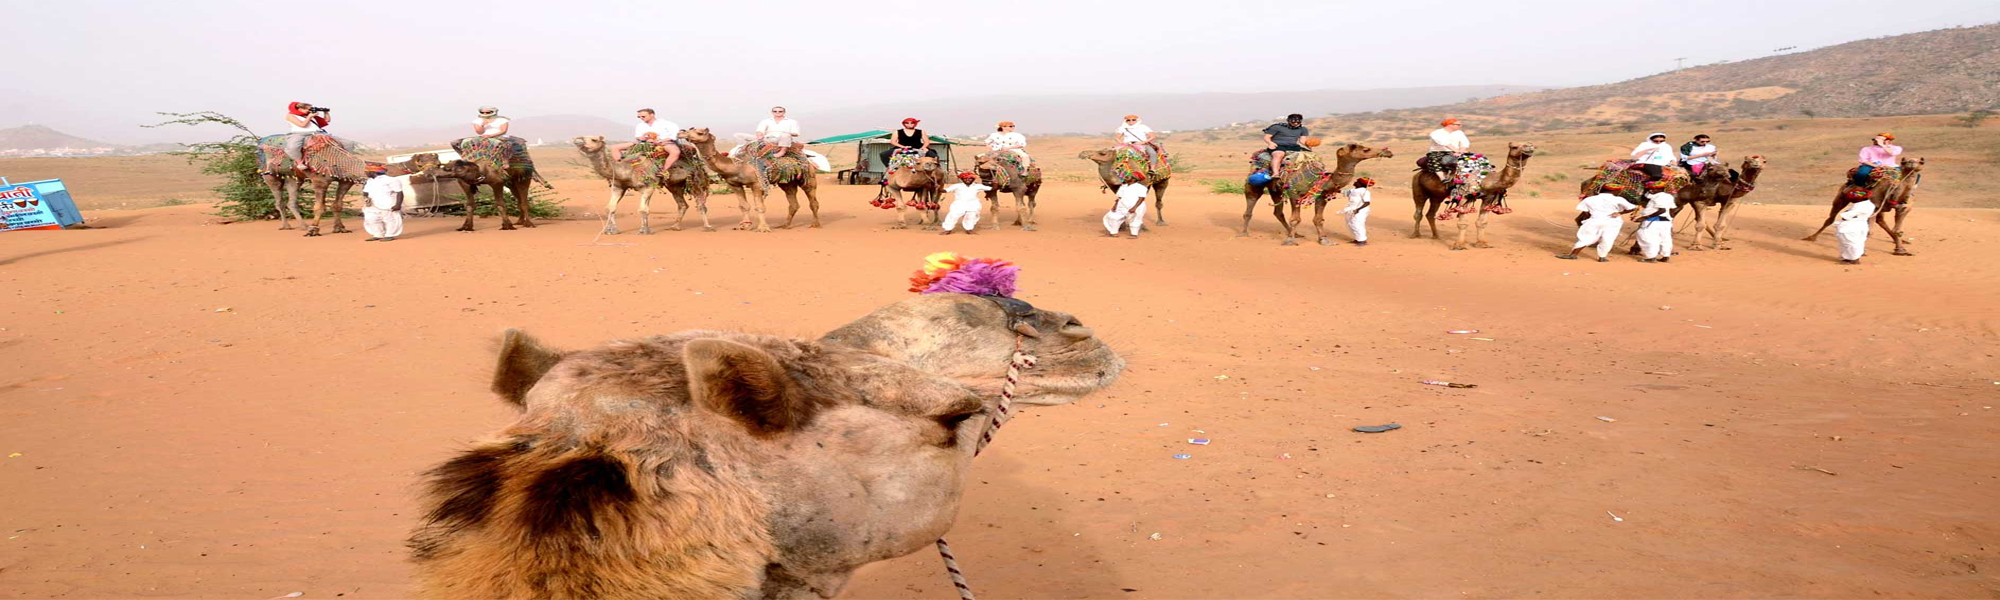 Camel Safari Tours in India with Fort and Palaces Tours in India  